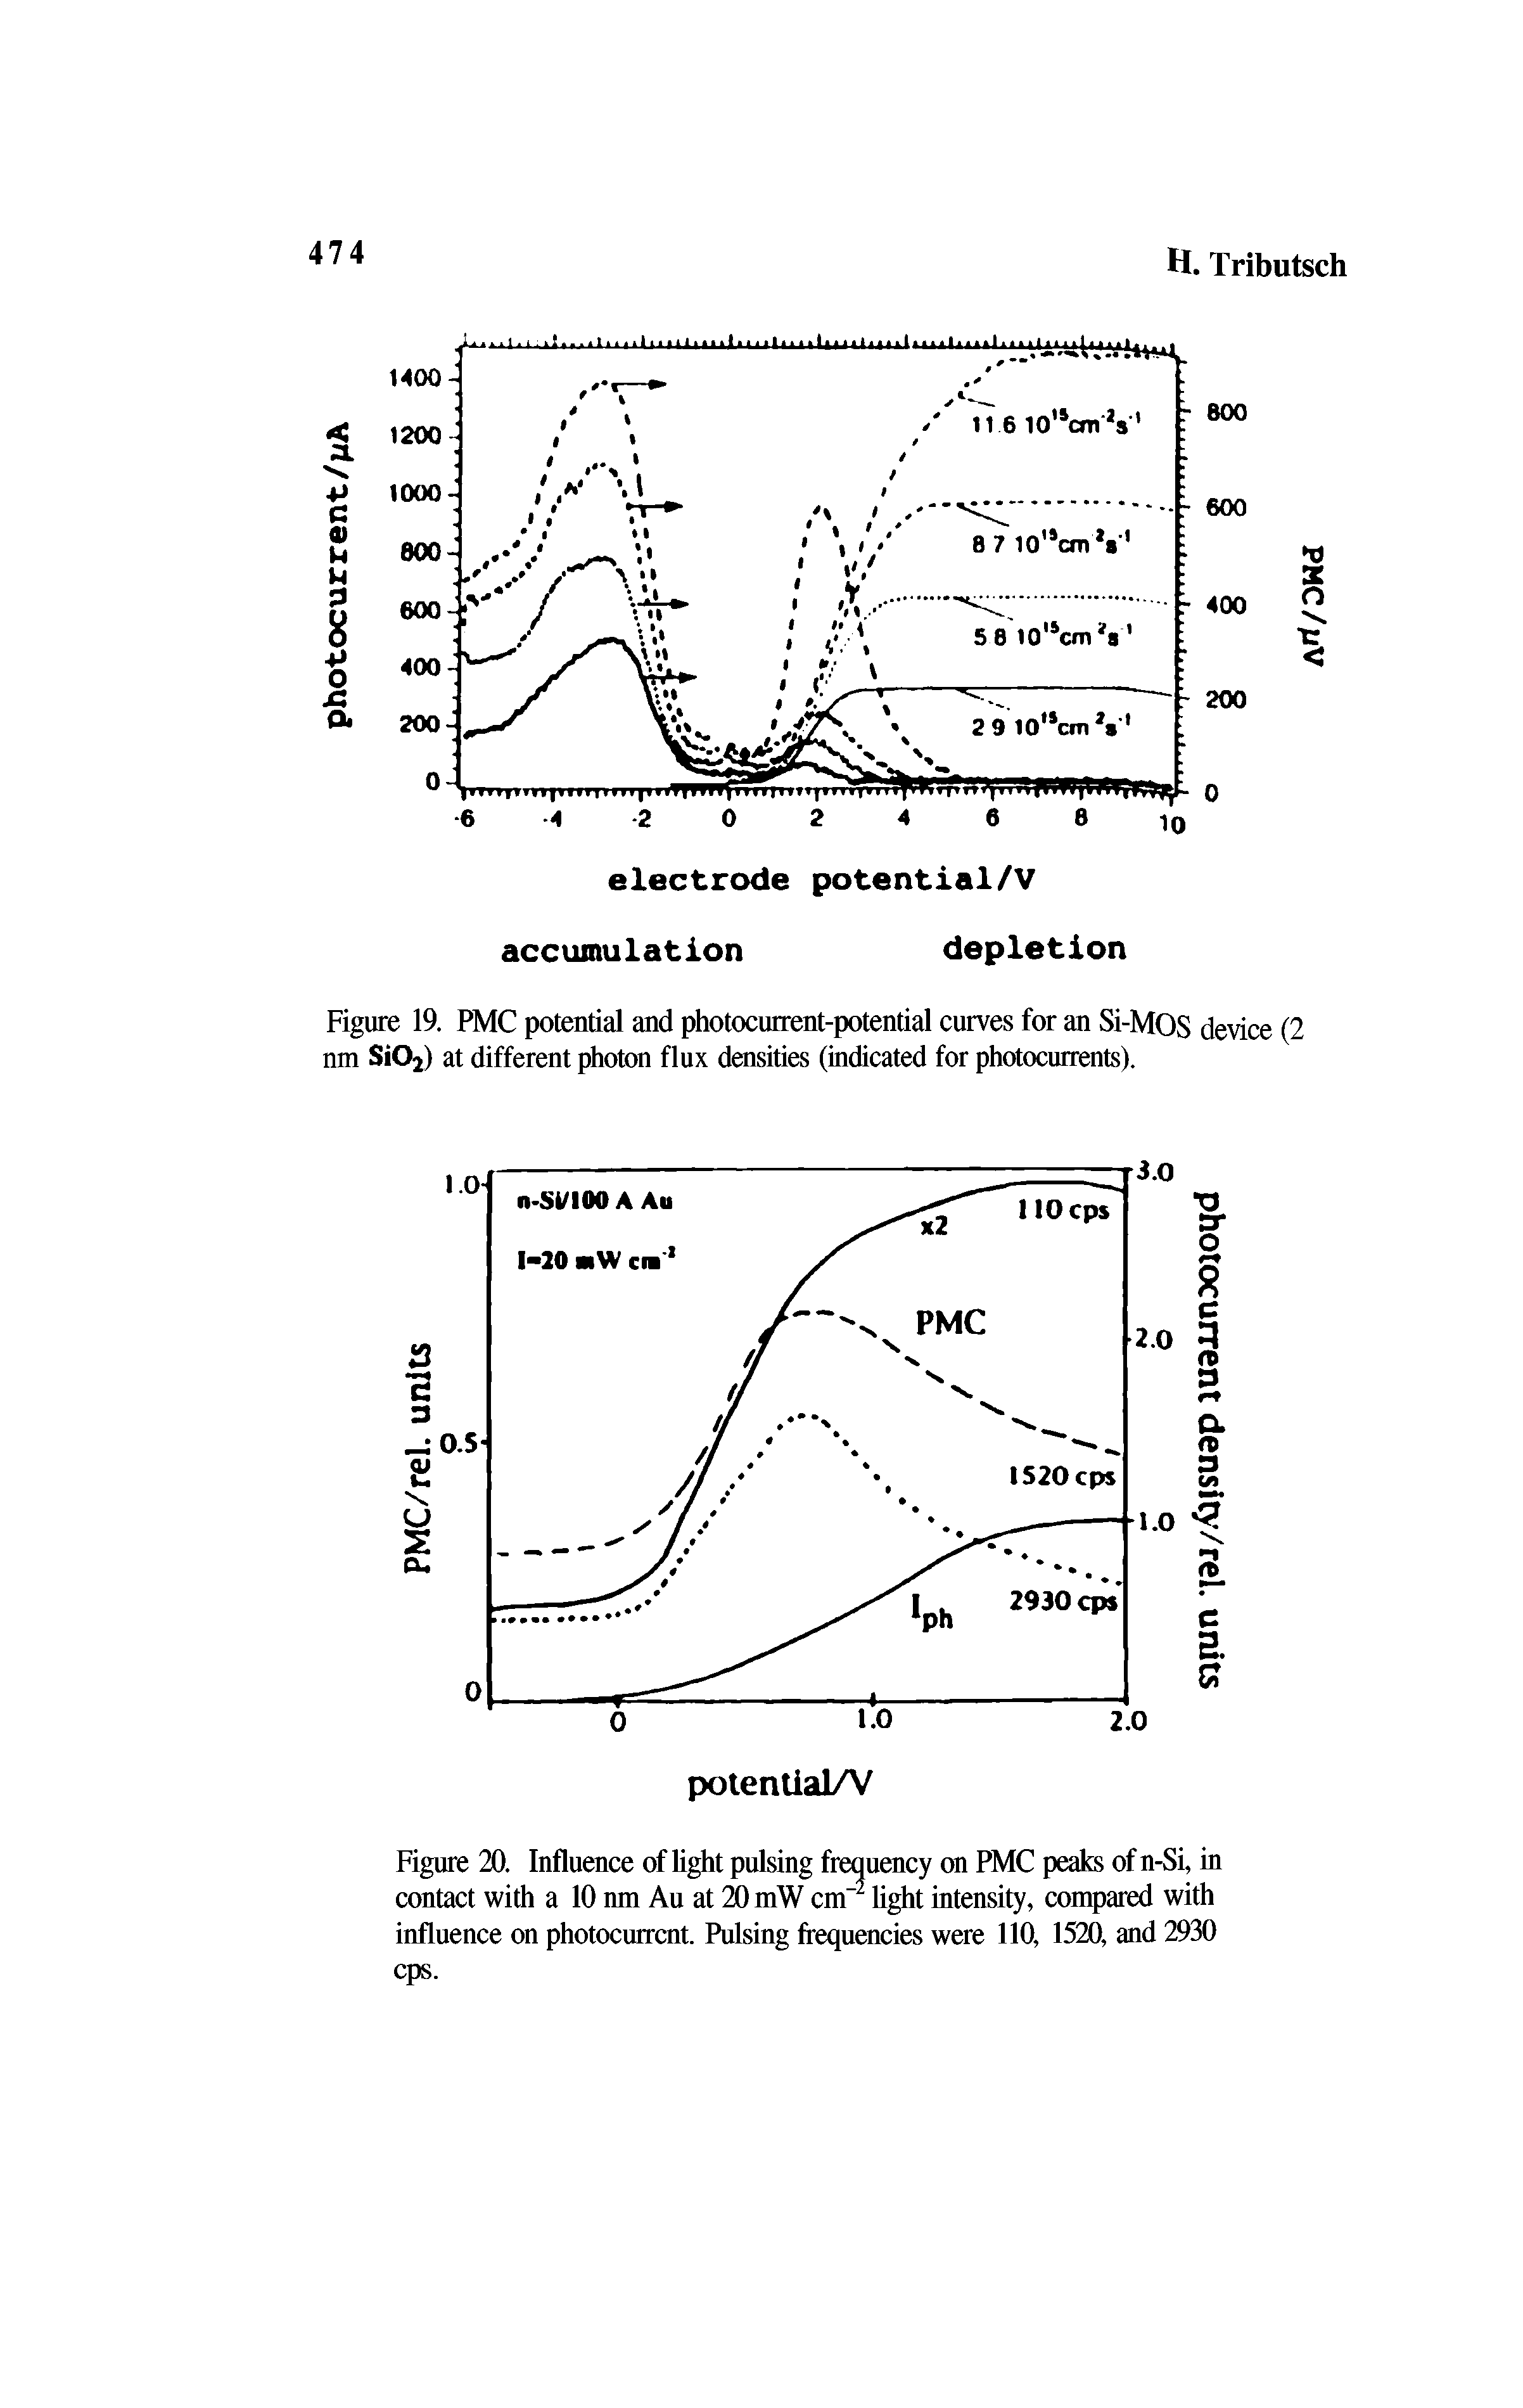 Figure 20. Influence of light pulsing frequency on PMC peaks of n-Si, in contact with a 10 nm Au at 20 mW cm-1 light intensity, compared with influence on photocurrcnt. Pulsing frequencies were 110, 1520, and 2930 cps.